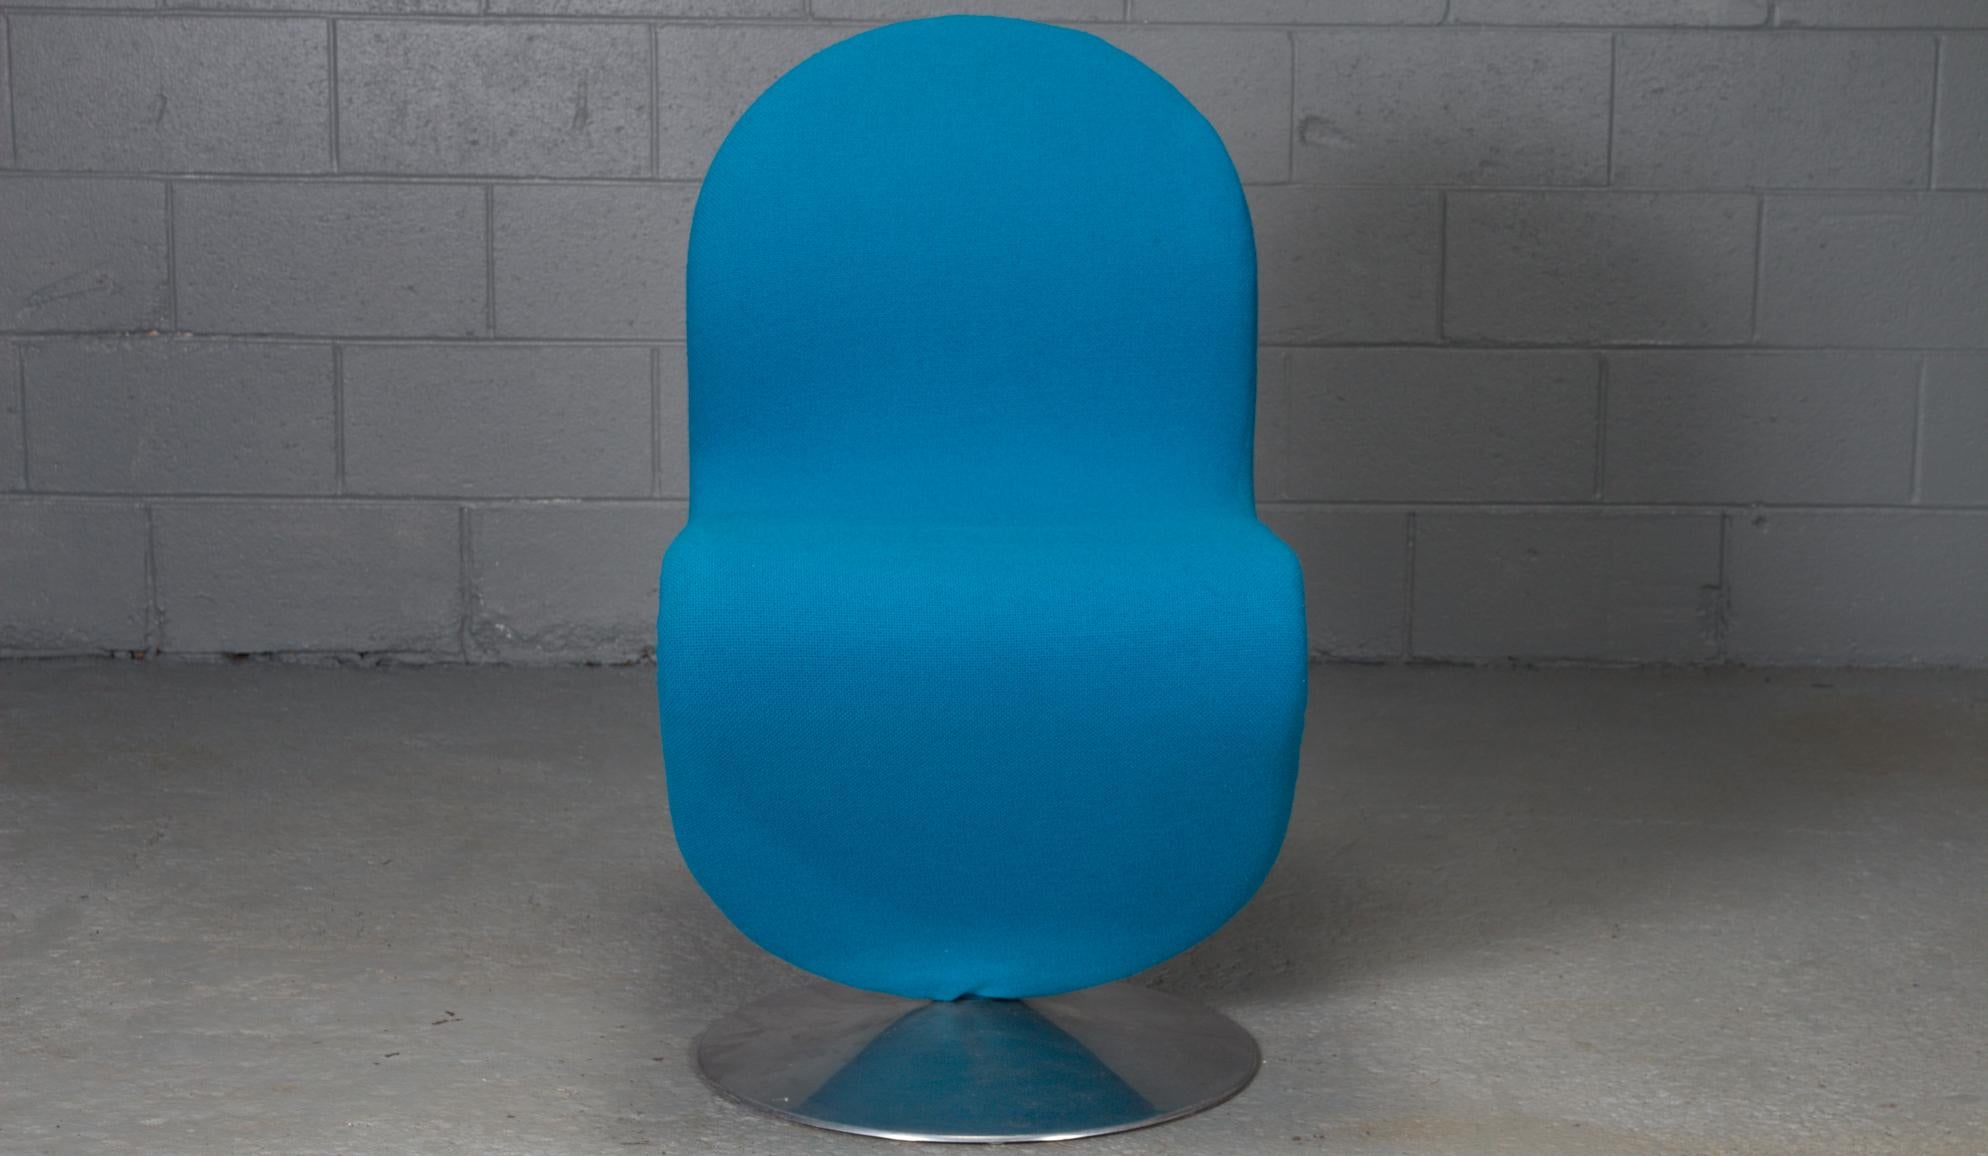 These striking chairs were designed in the 1950s by Verner Panton for Fritz Hansen in Denmark. The 1-2-3 chairs are upholstered in a bright blue fabric, and sold as a set of six.